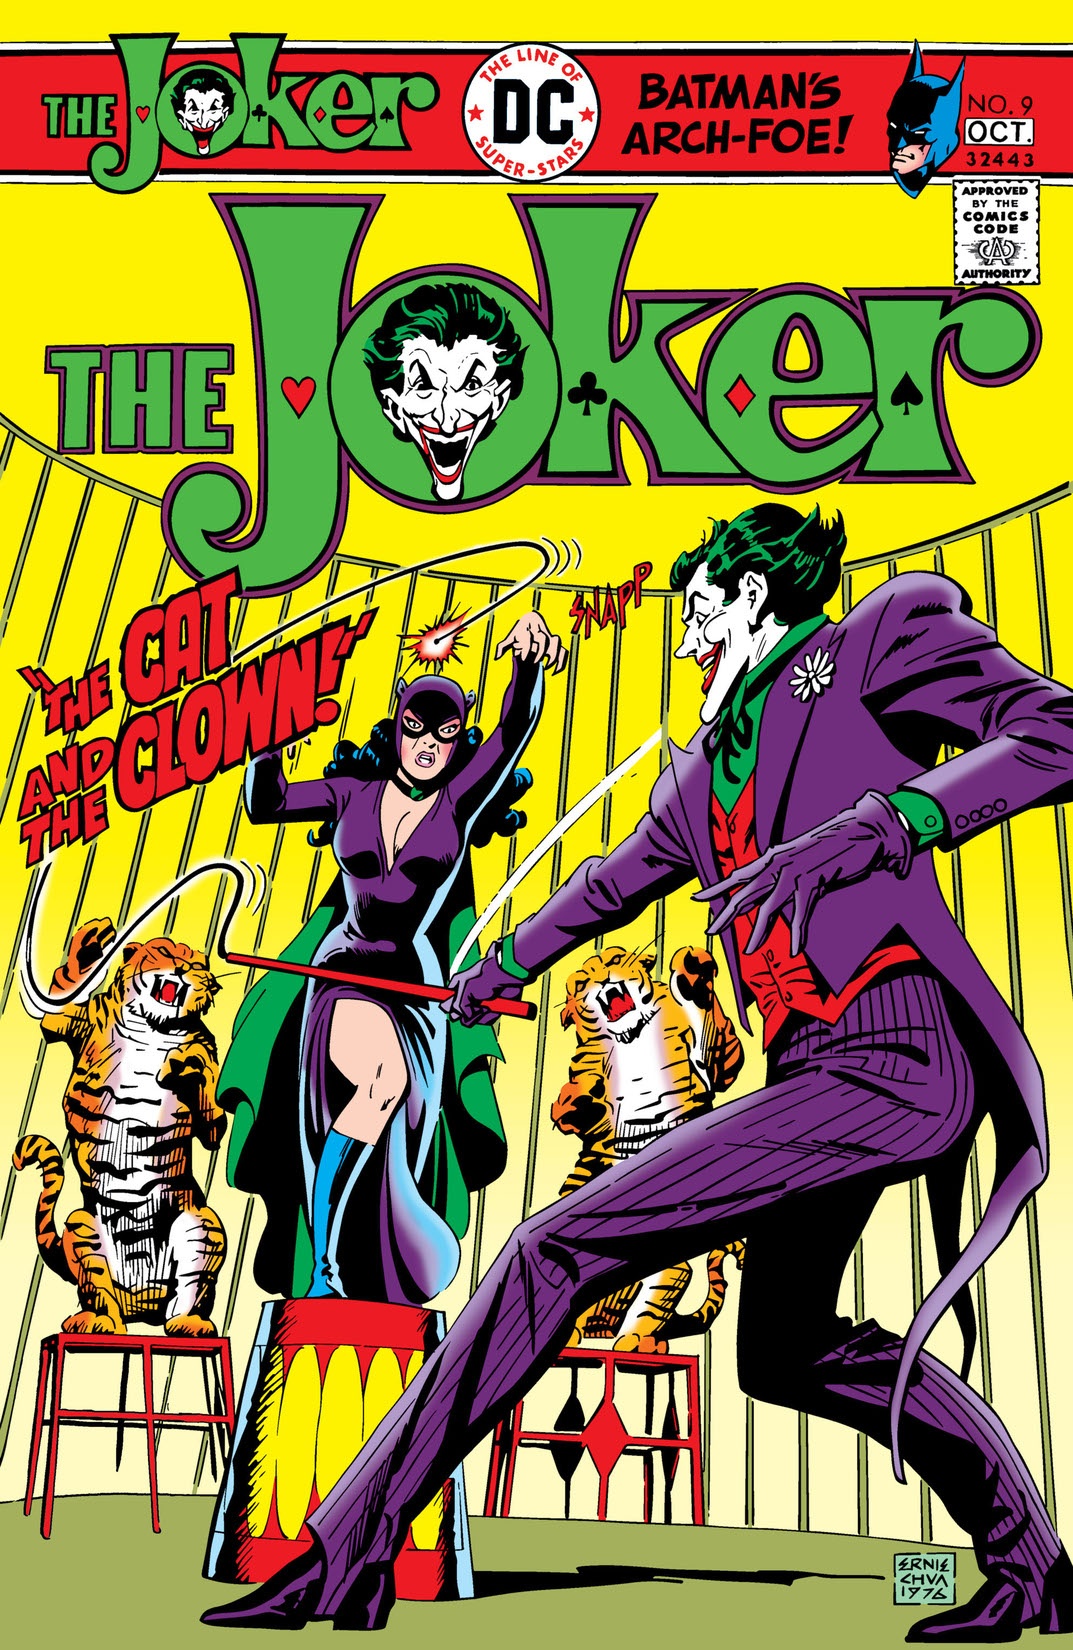 The Joker (1975-) #9 preview images